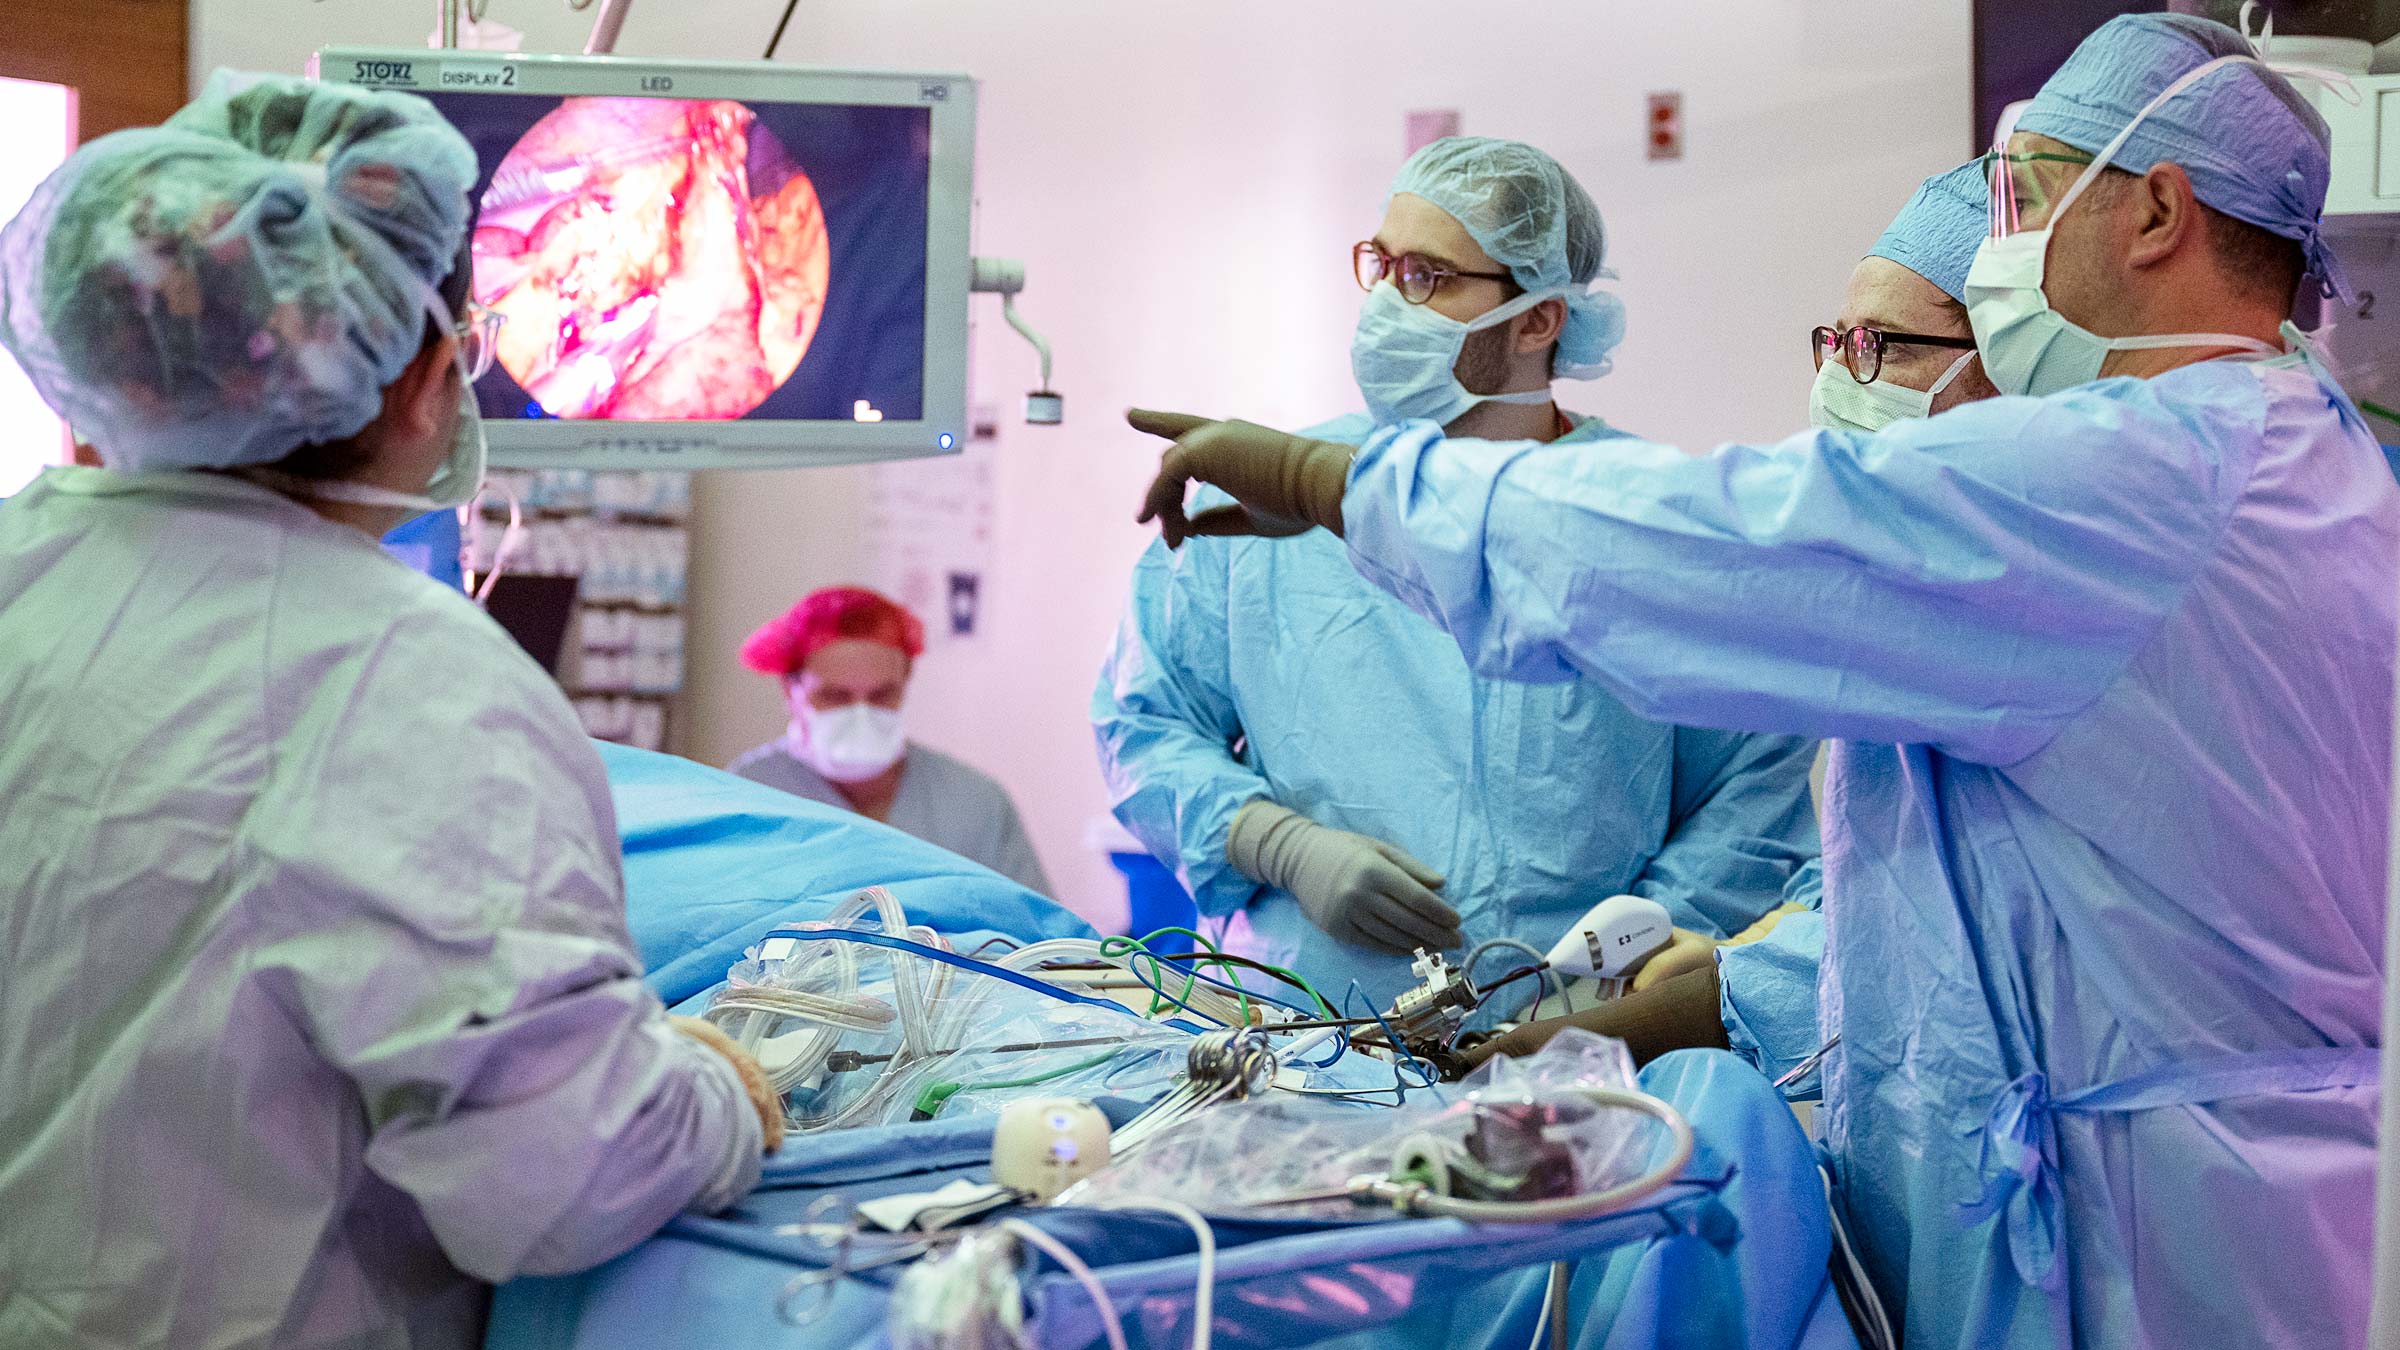 Dr. Kalady pointing at a screen in the operating room